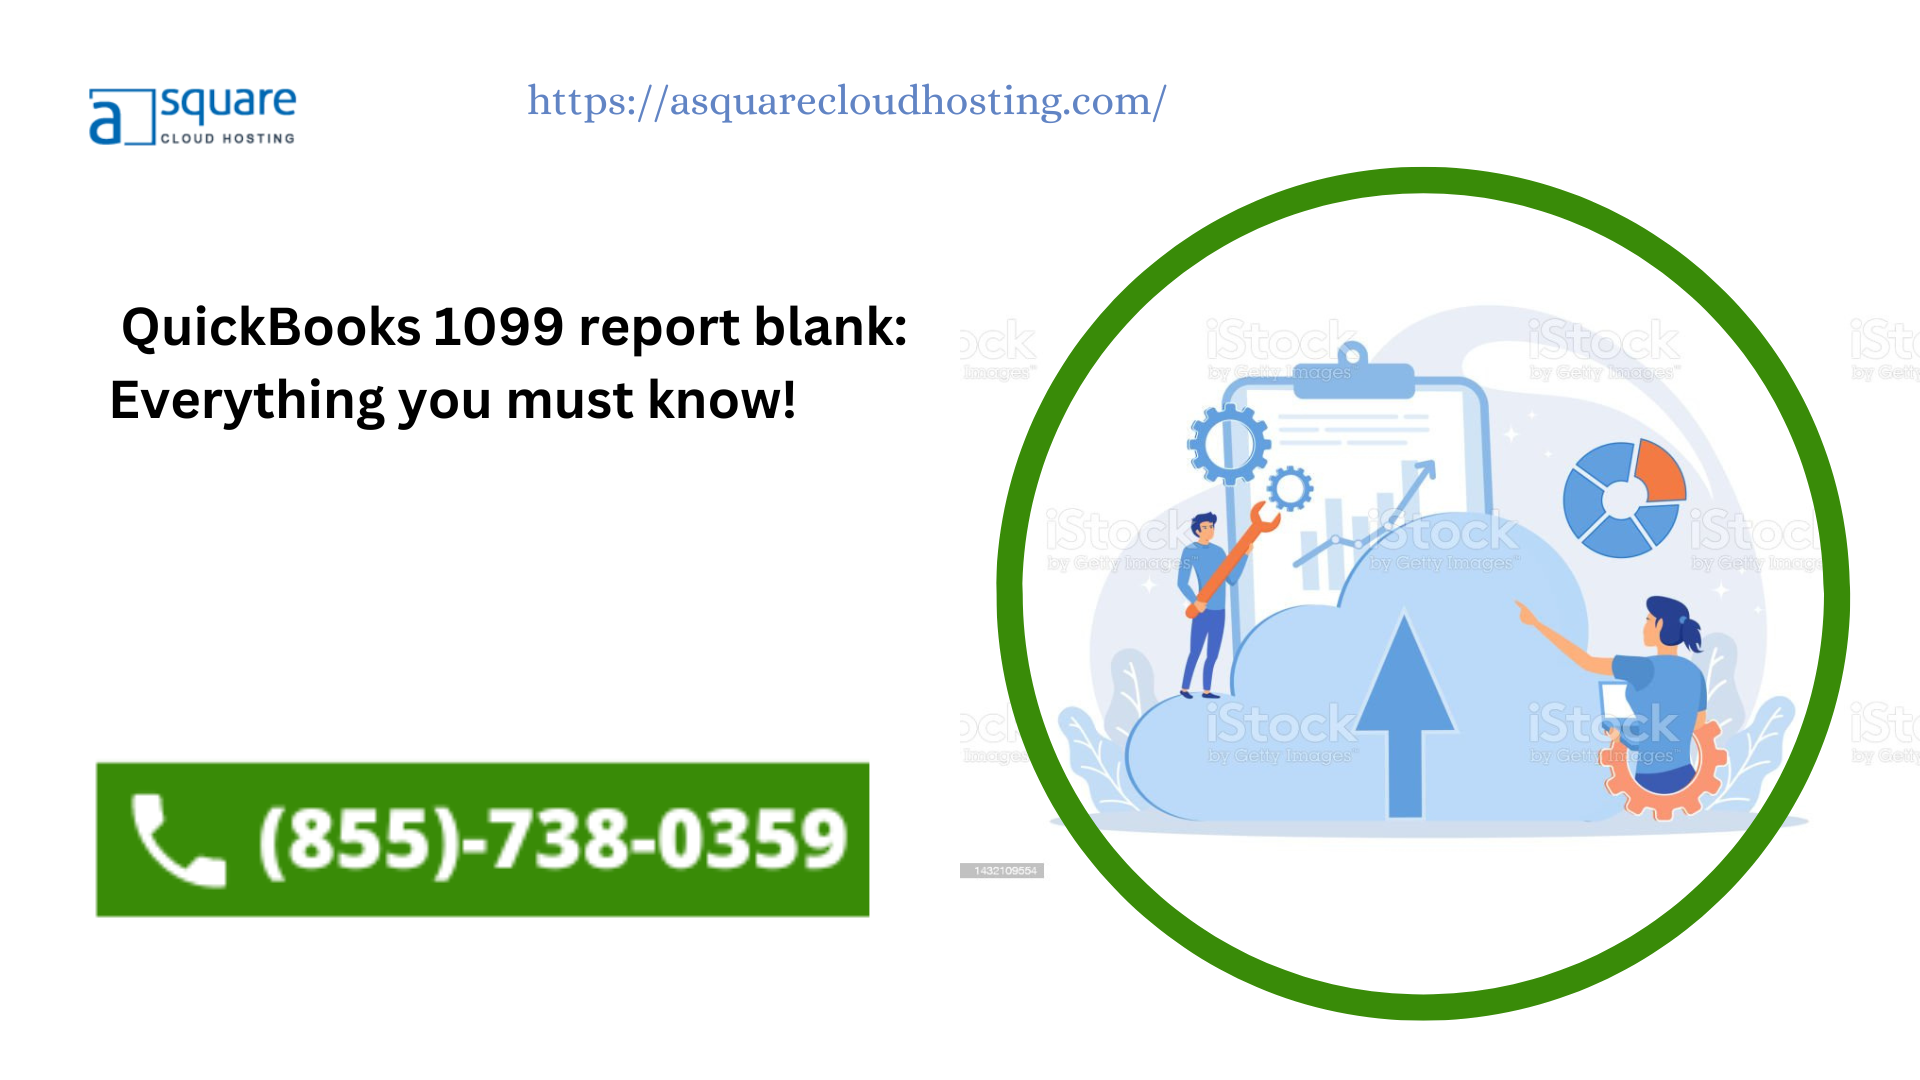 QuickBooks 1099 report blank: Everything you must know!